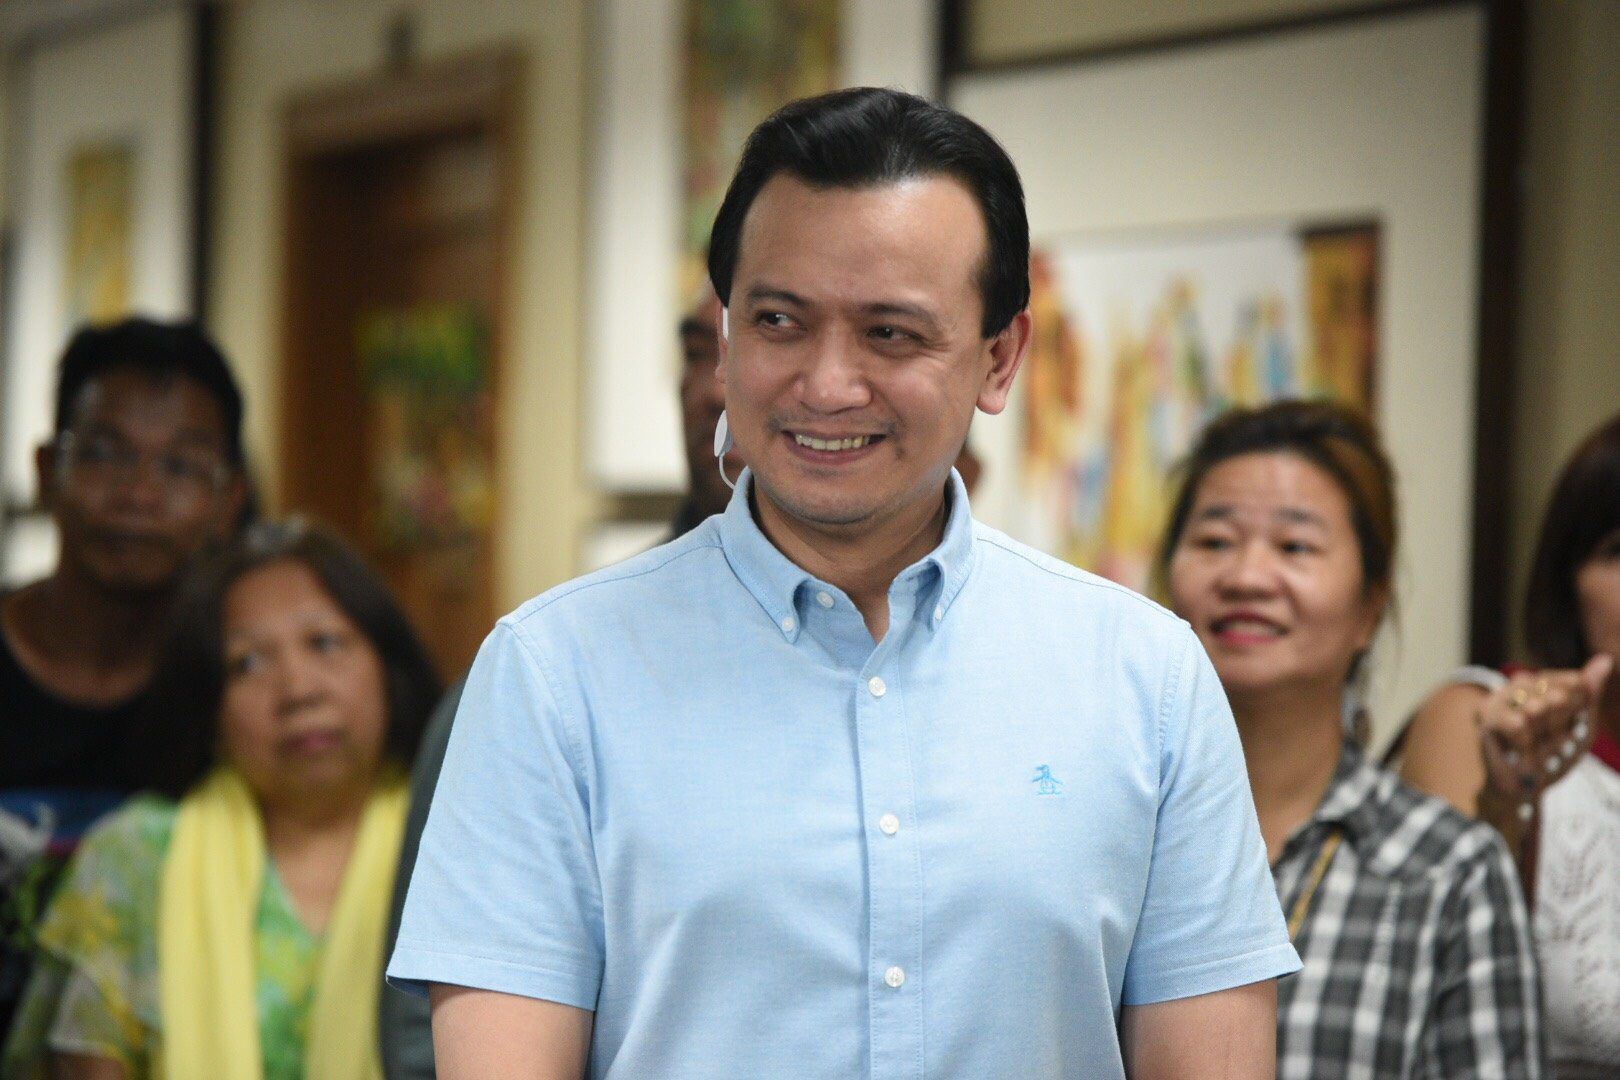 Military defers action on Trillanes, waits for SC